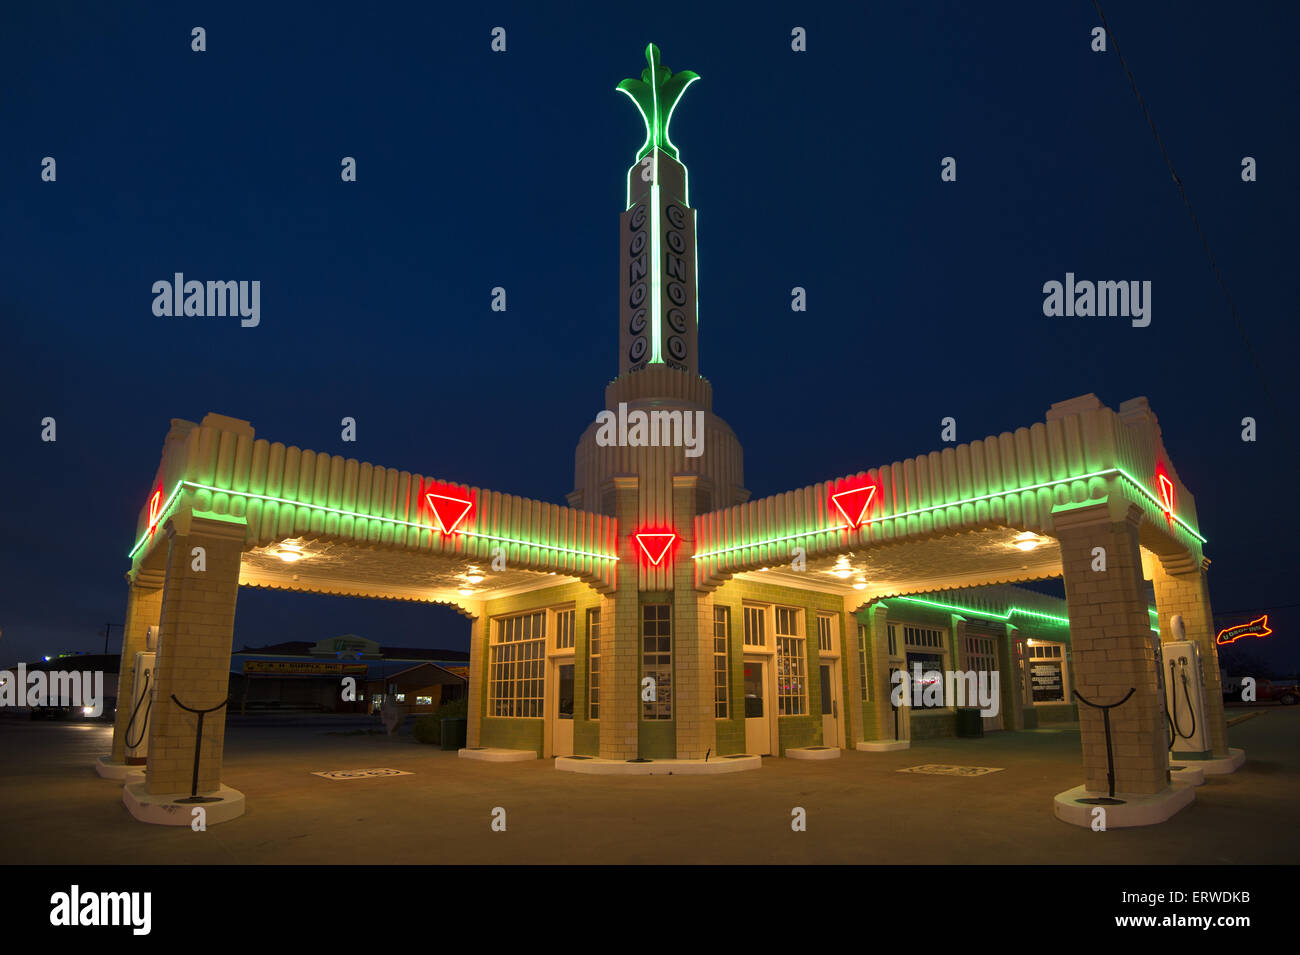 The famed Conoco Tower gas station and U-Drop-Inn on historic Route 66 located in Shamrock, Texas lit up with neon in the night. Stock Photo